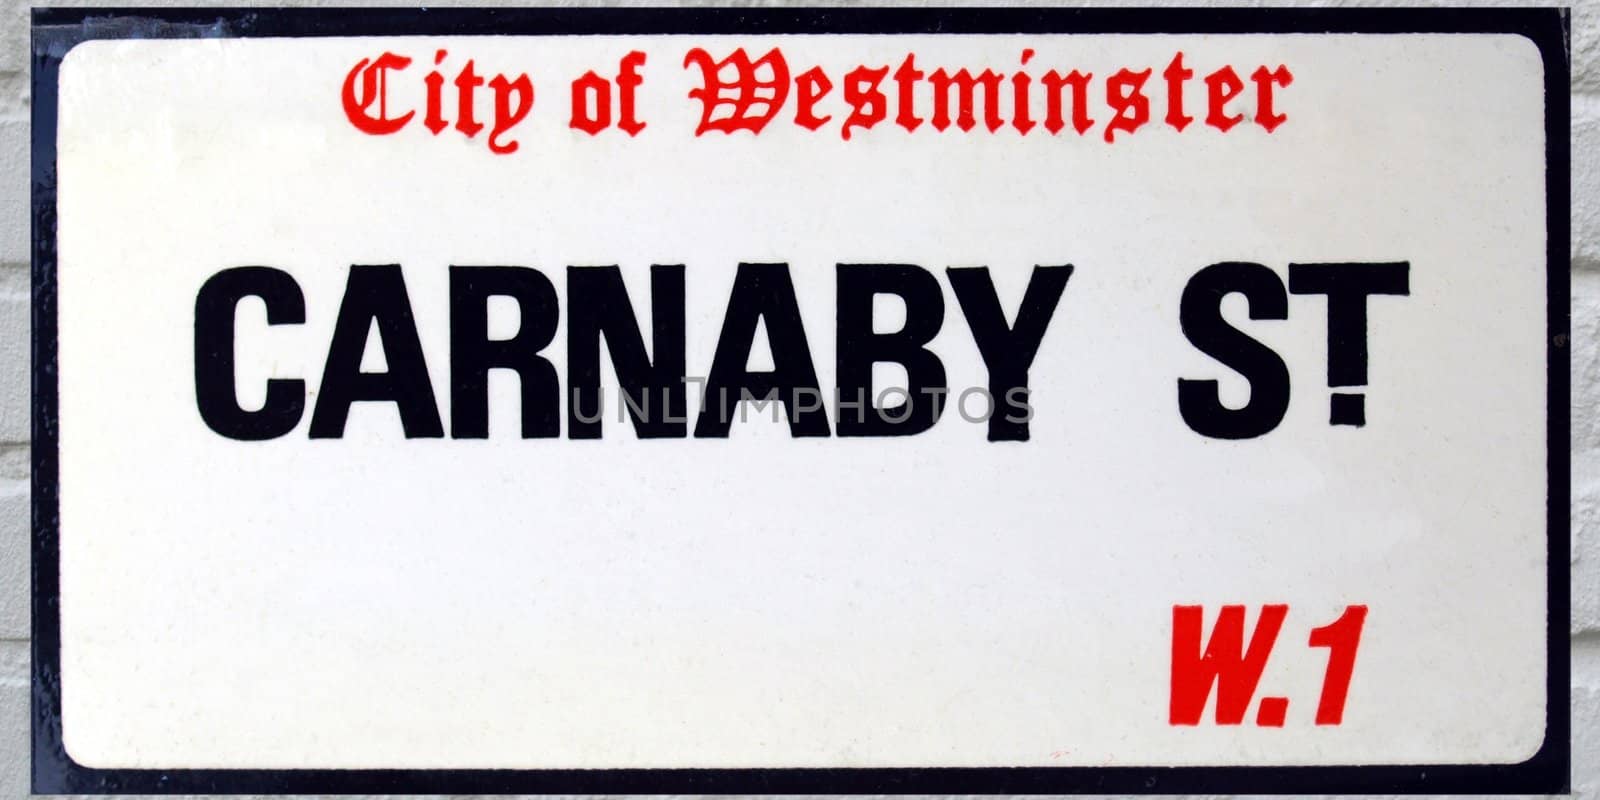 Carnaby Street sign in the City of Westminster, London